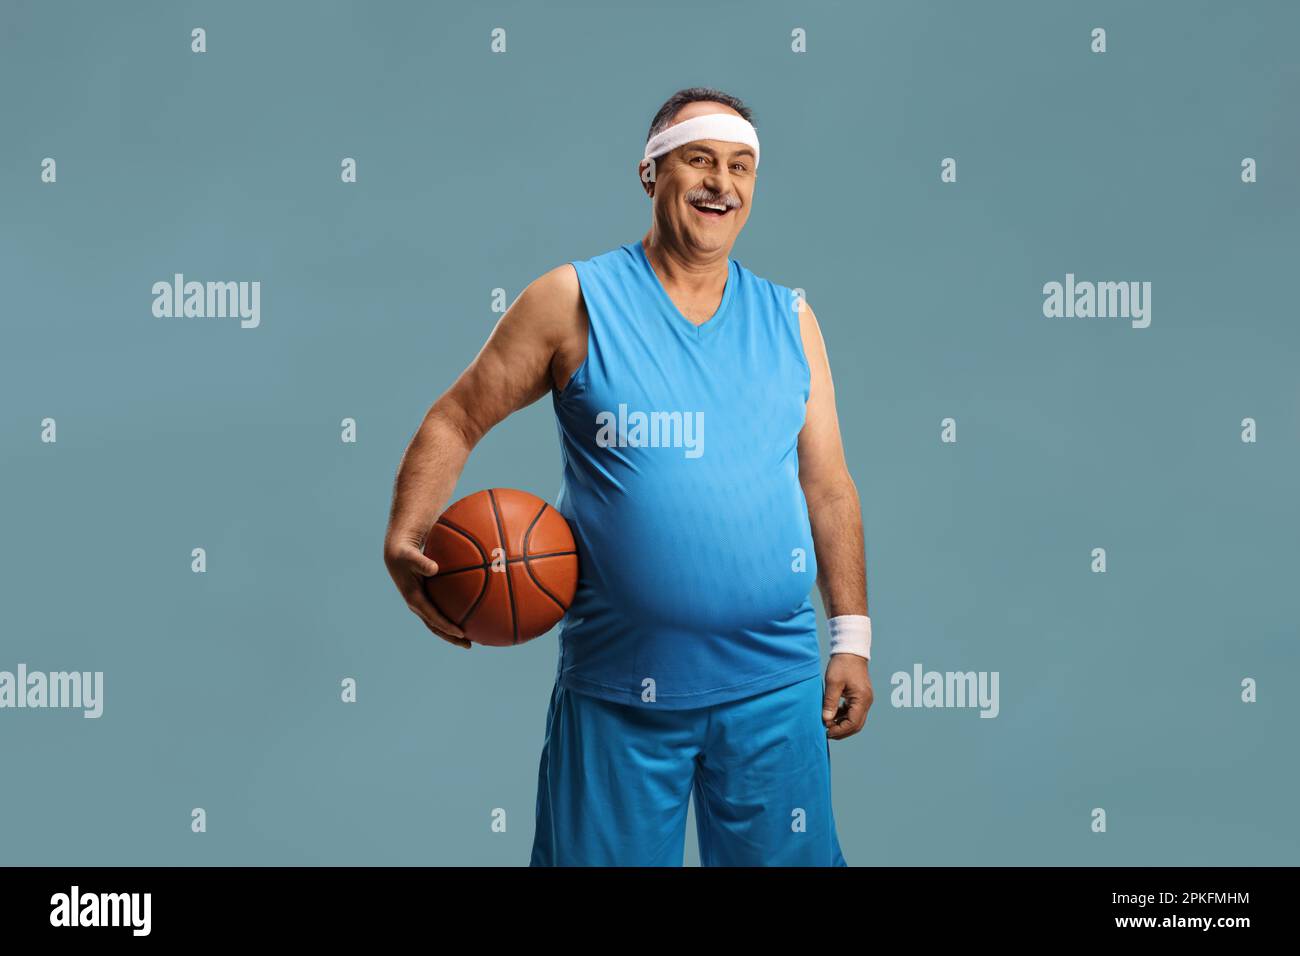 Smiling mature man in a blue jersey holding a basketball isolated on blue background Stock Photo